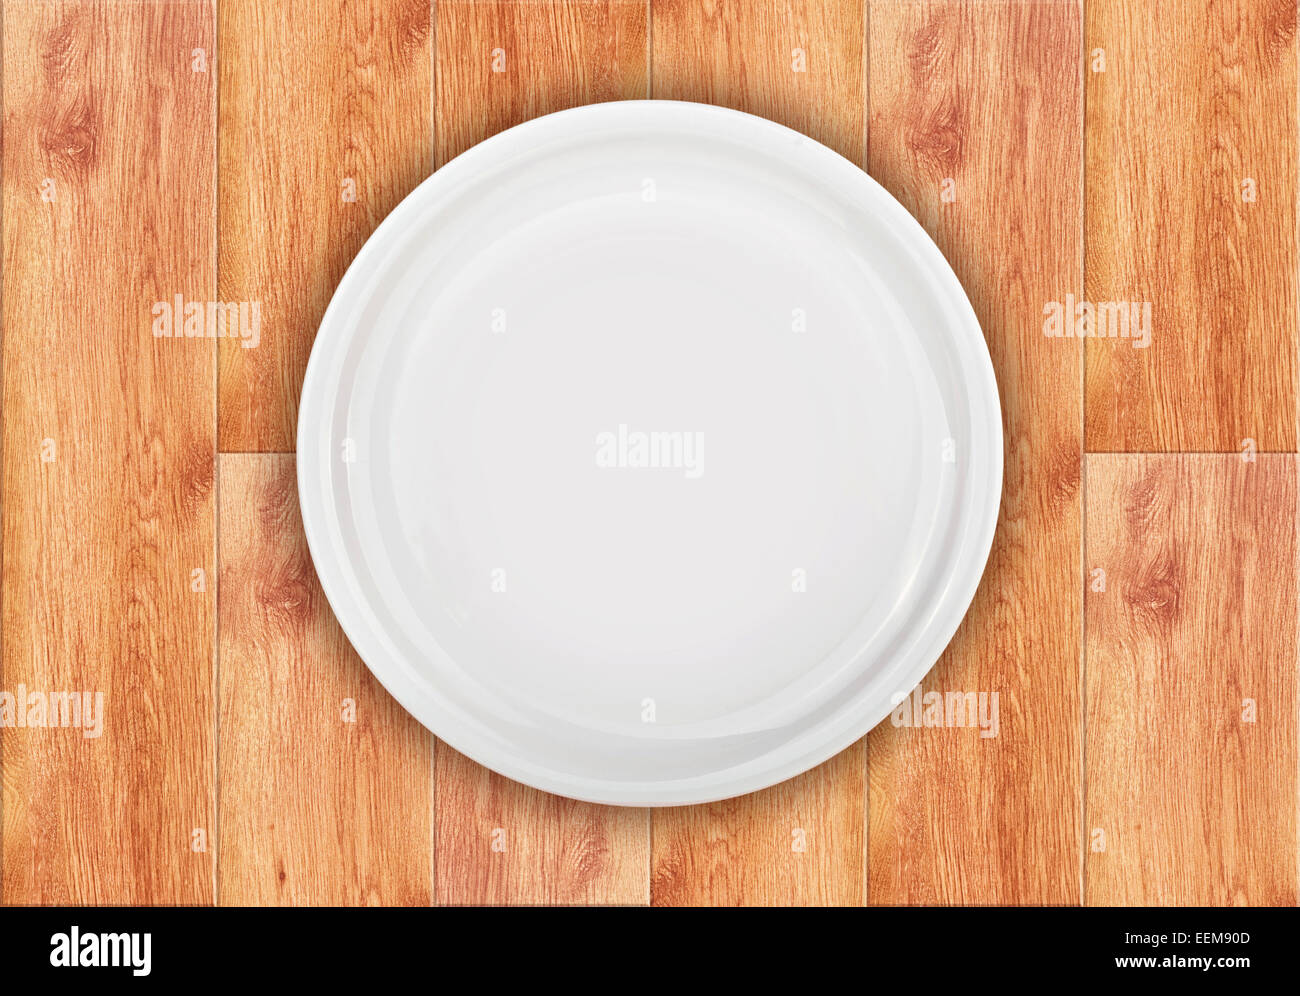 Empty Clean White Flat Plate on Wooden Table Background Stock Photo